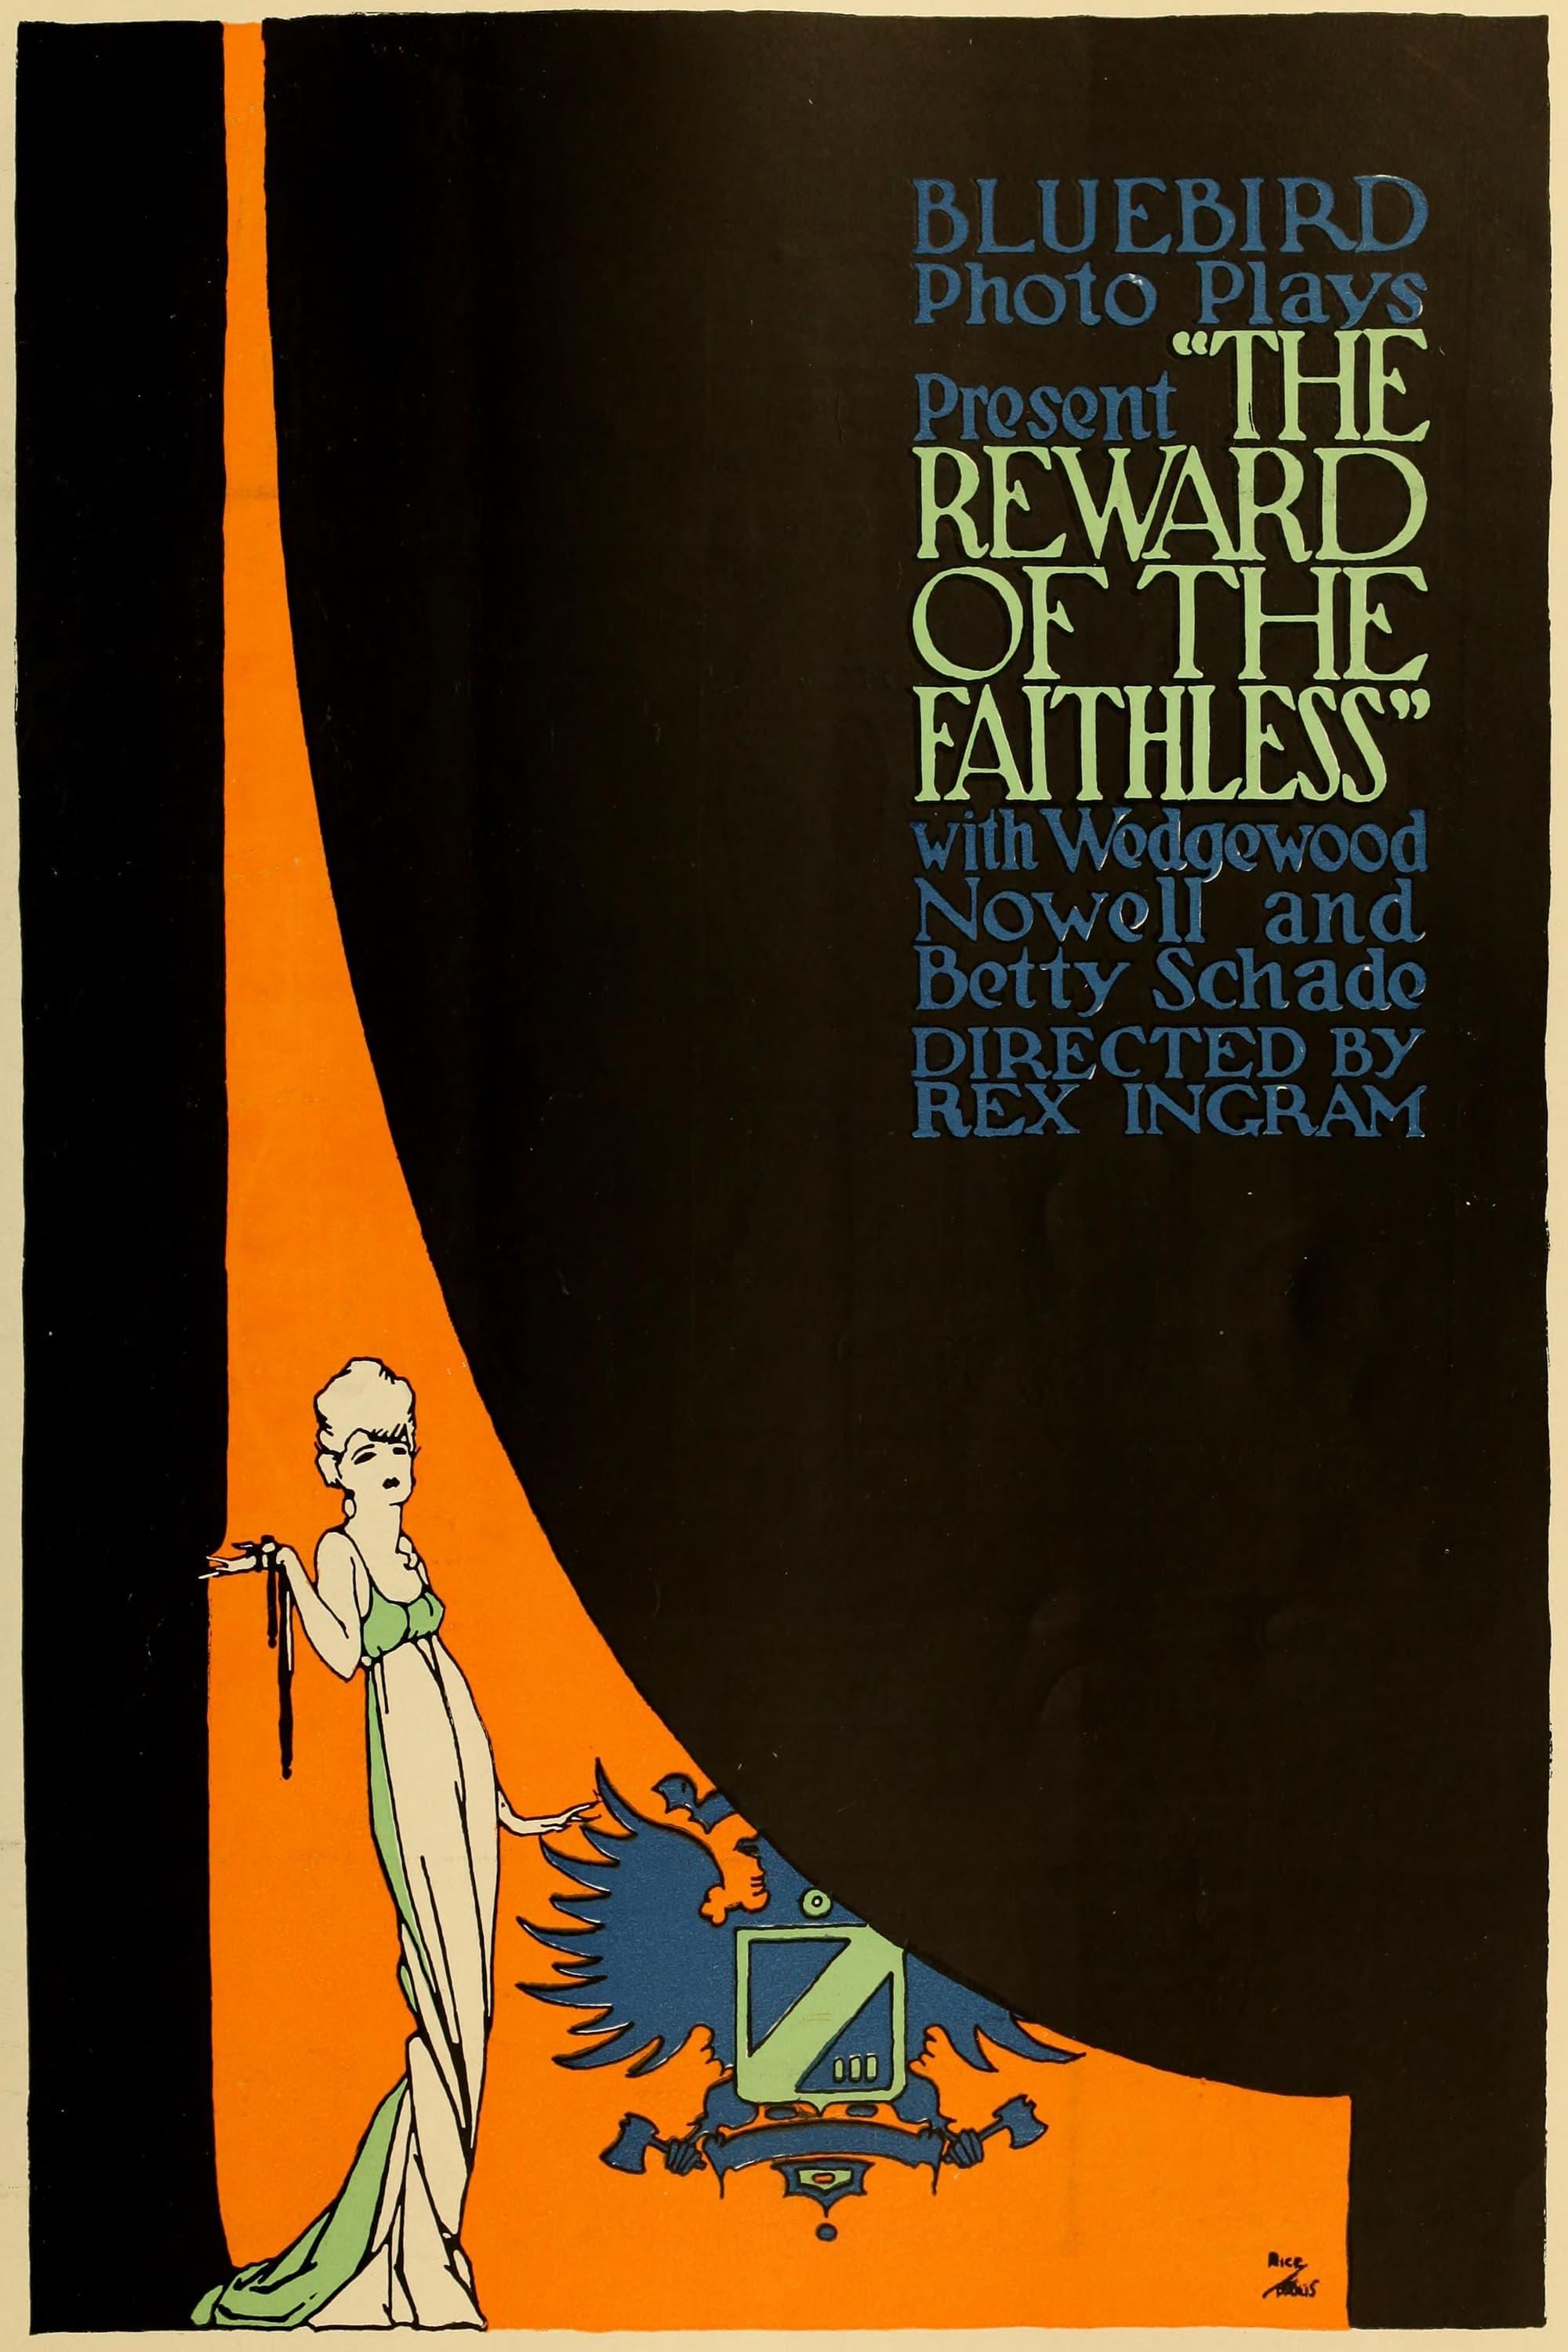 The Reward of the Faithless poster